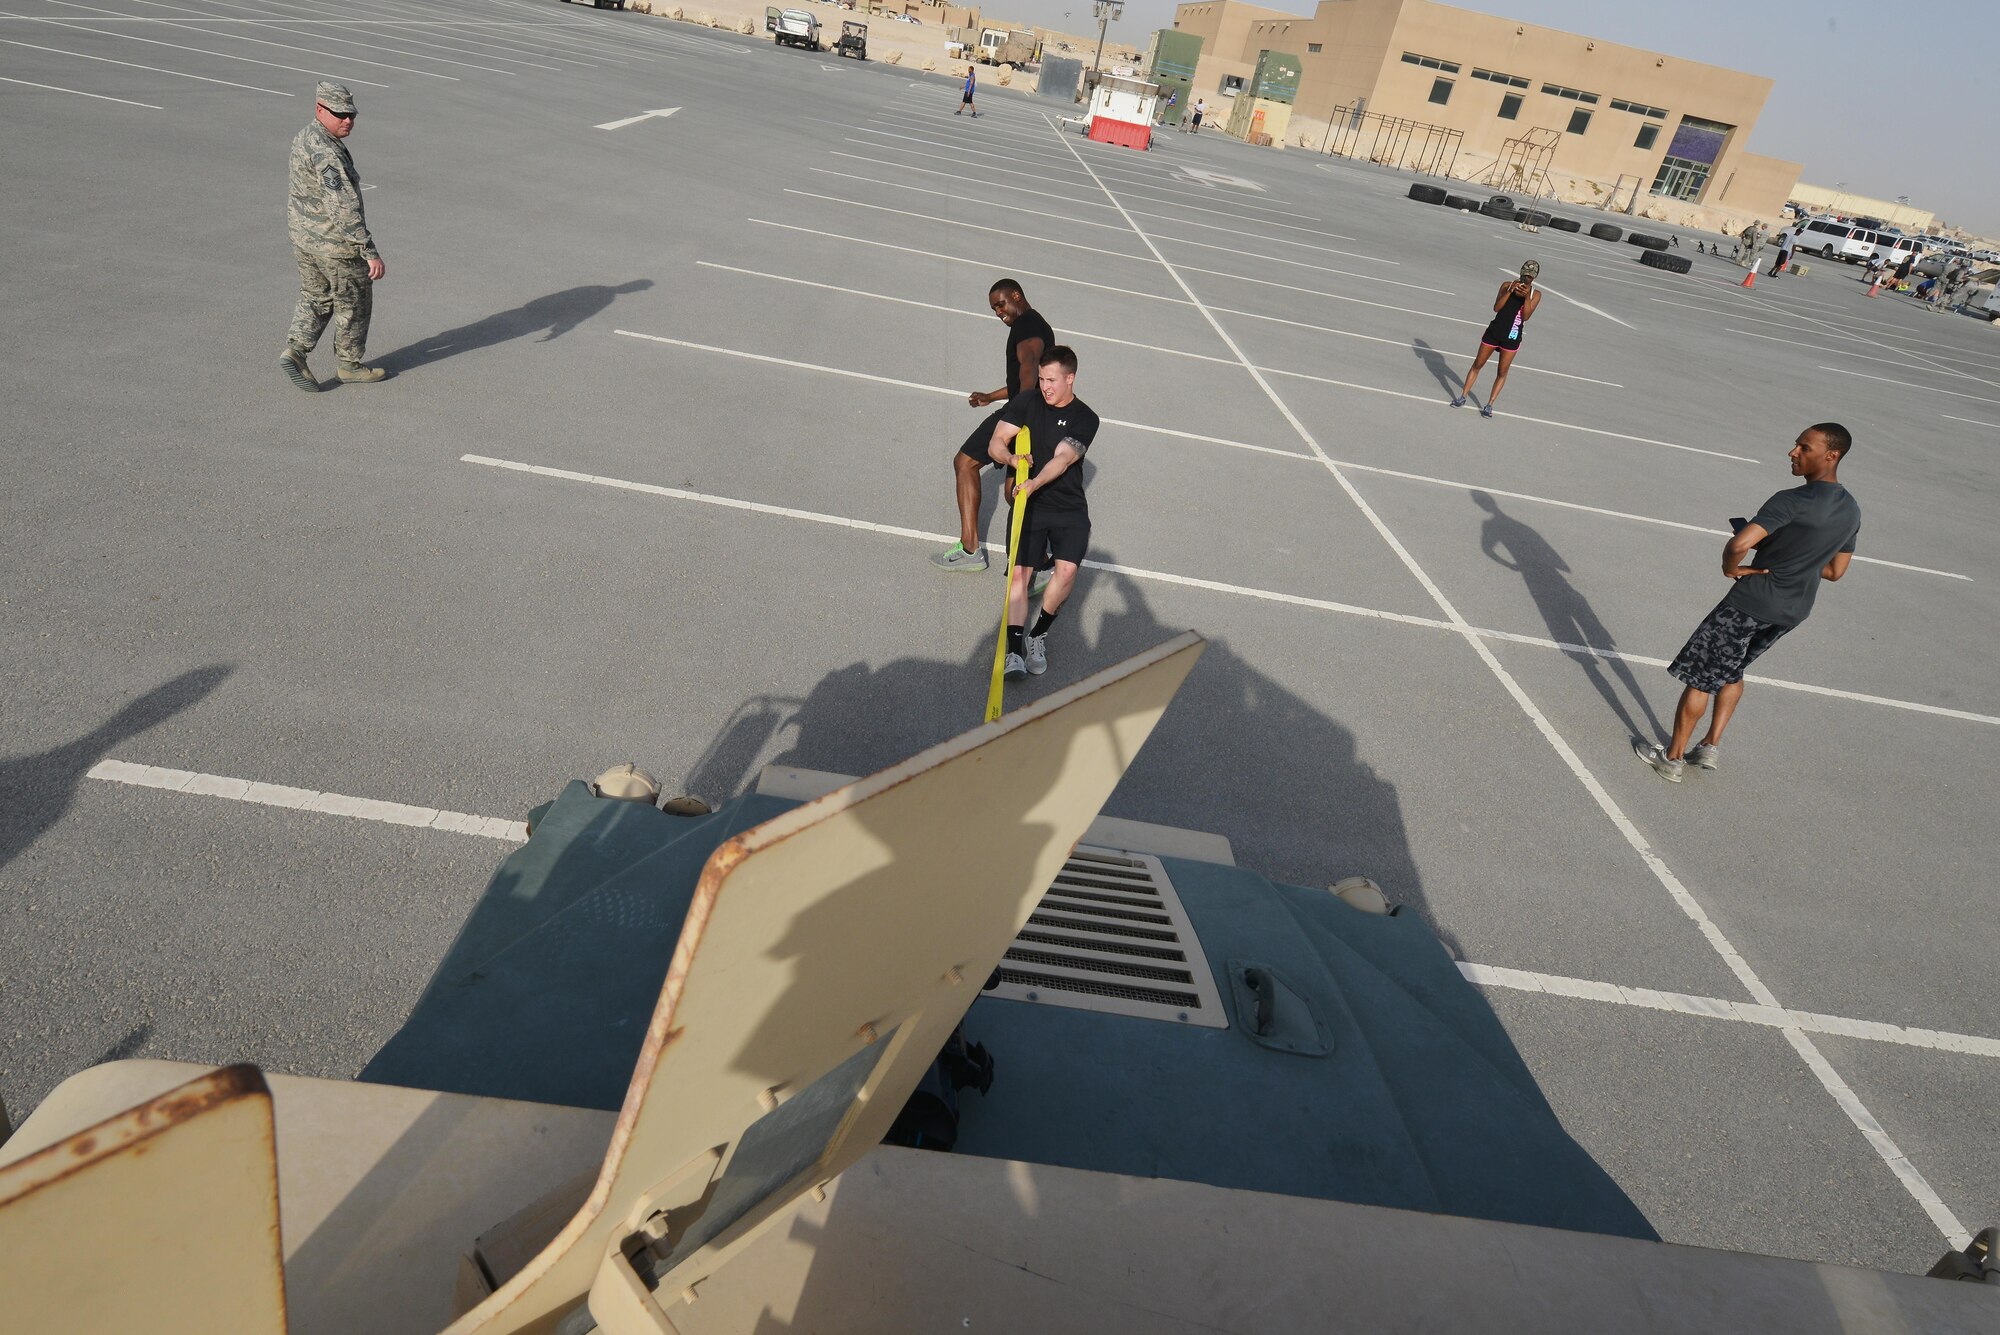 Tech. Sgt Cornelius Bostic and Airman 1st Class Corey Jimerson pull a Humvee for a combat challenge as part of National Police week event May 14, 2015 at Al Udeid Air Base, Qatar. National Police was established to honor American law enforcement in 1962 to help gain recognition to officers that have lost their lives in the line of duty. (U.S. Air Force photo by Staff Sgt. Alexandre Montes)    